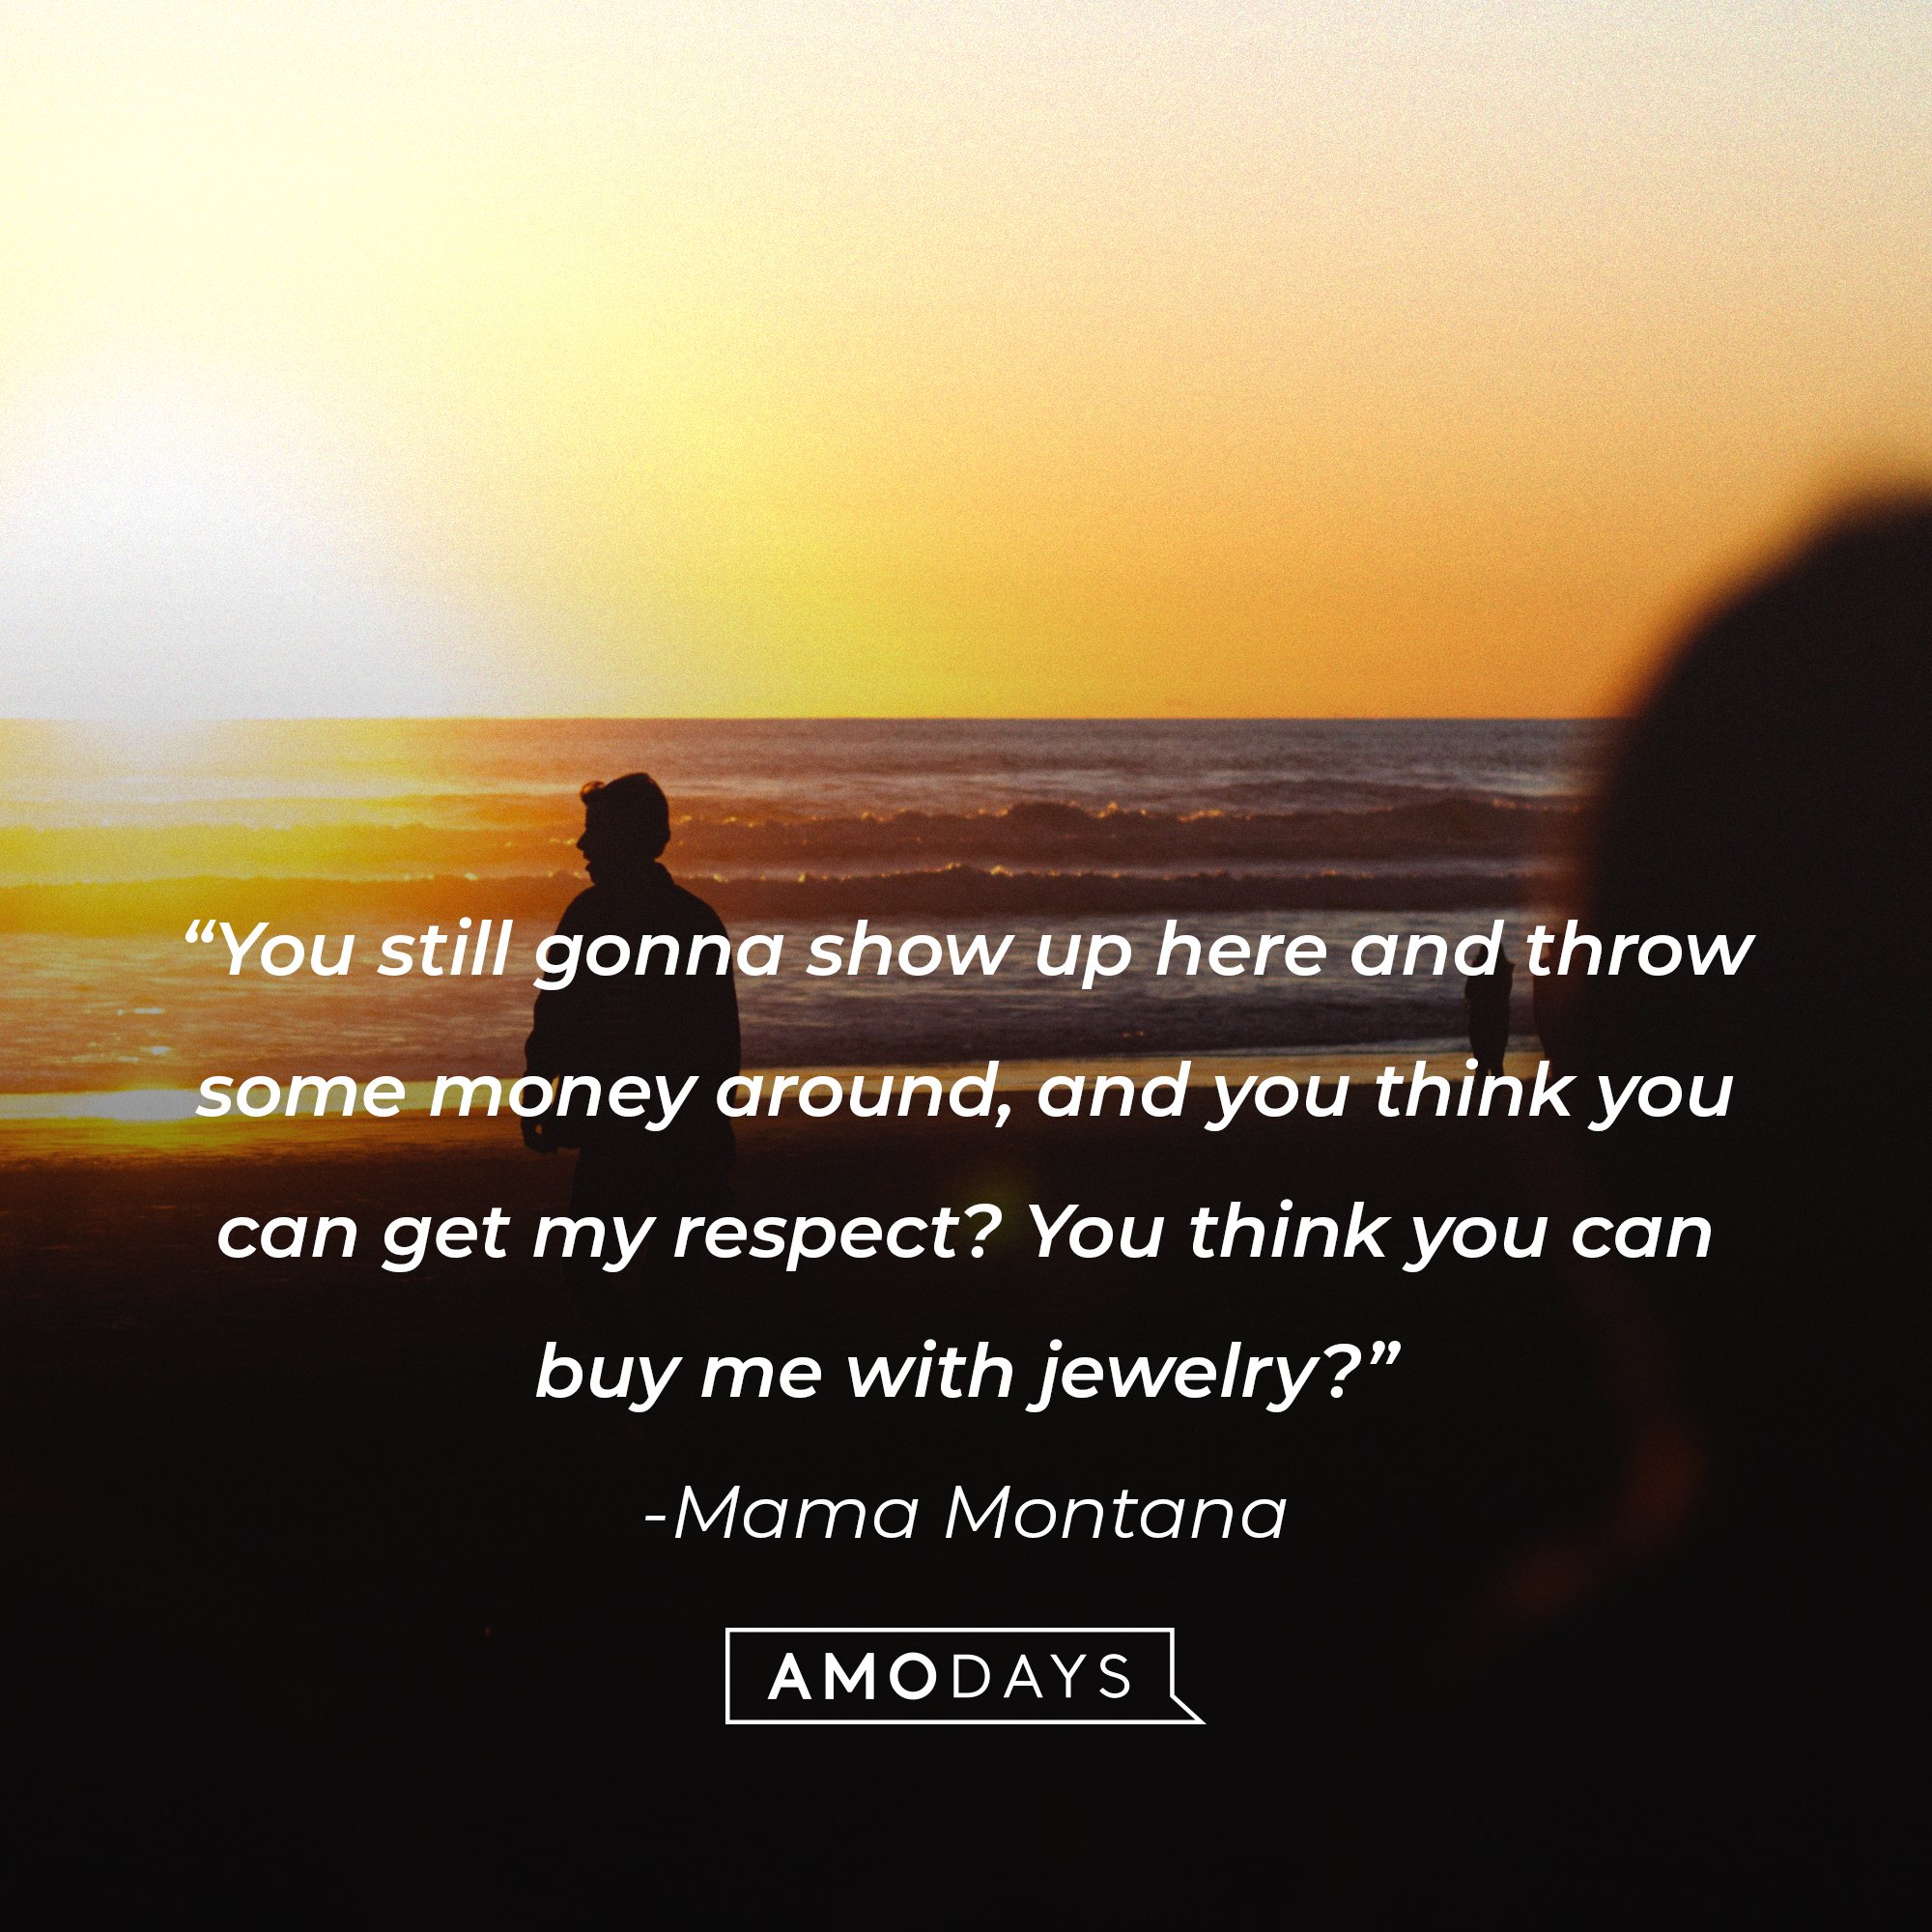 Mama Montana’s quote: “You still gonna show up here and throw some money around, and you think you can get my respect? You think you can buy me with jewelry?” | Image: AmoDays